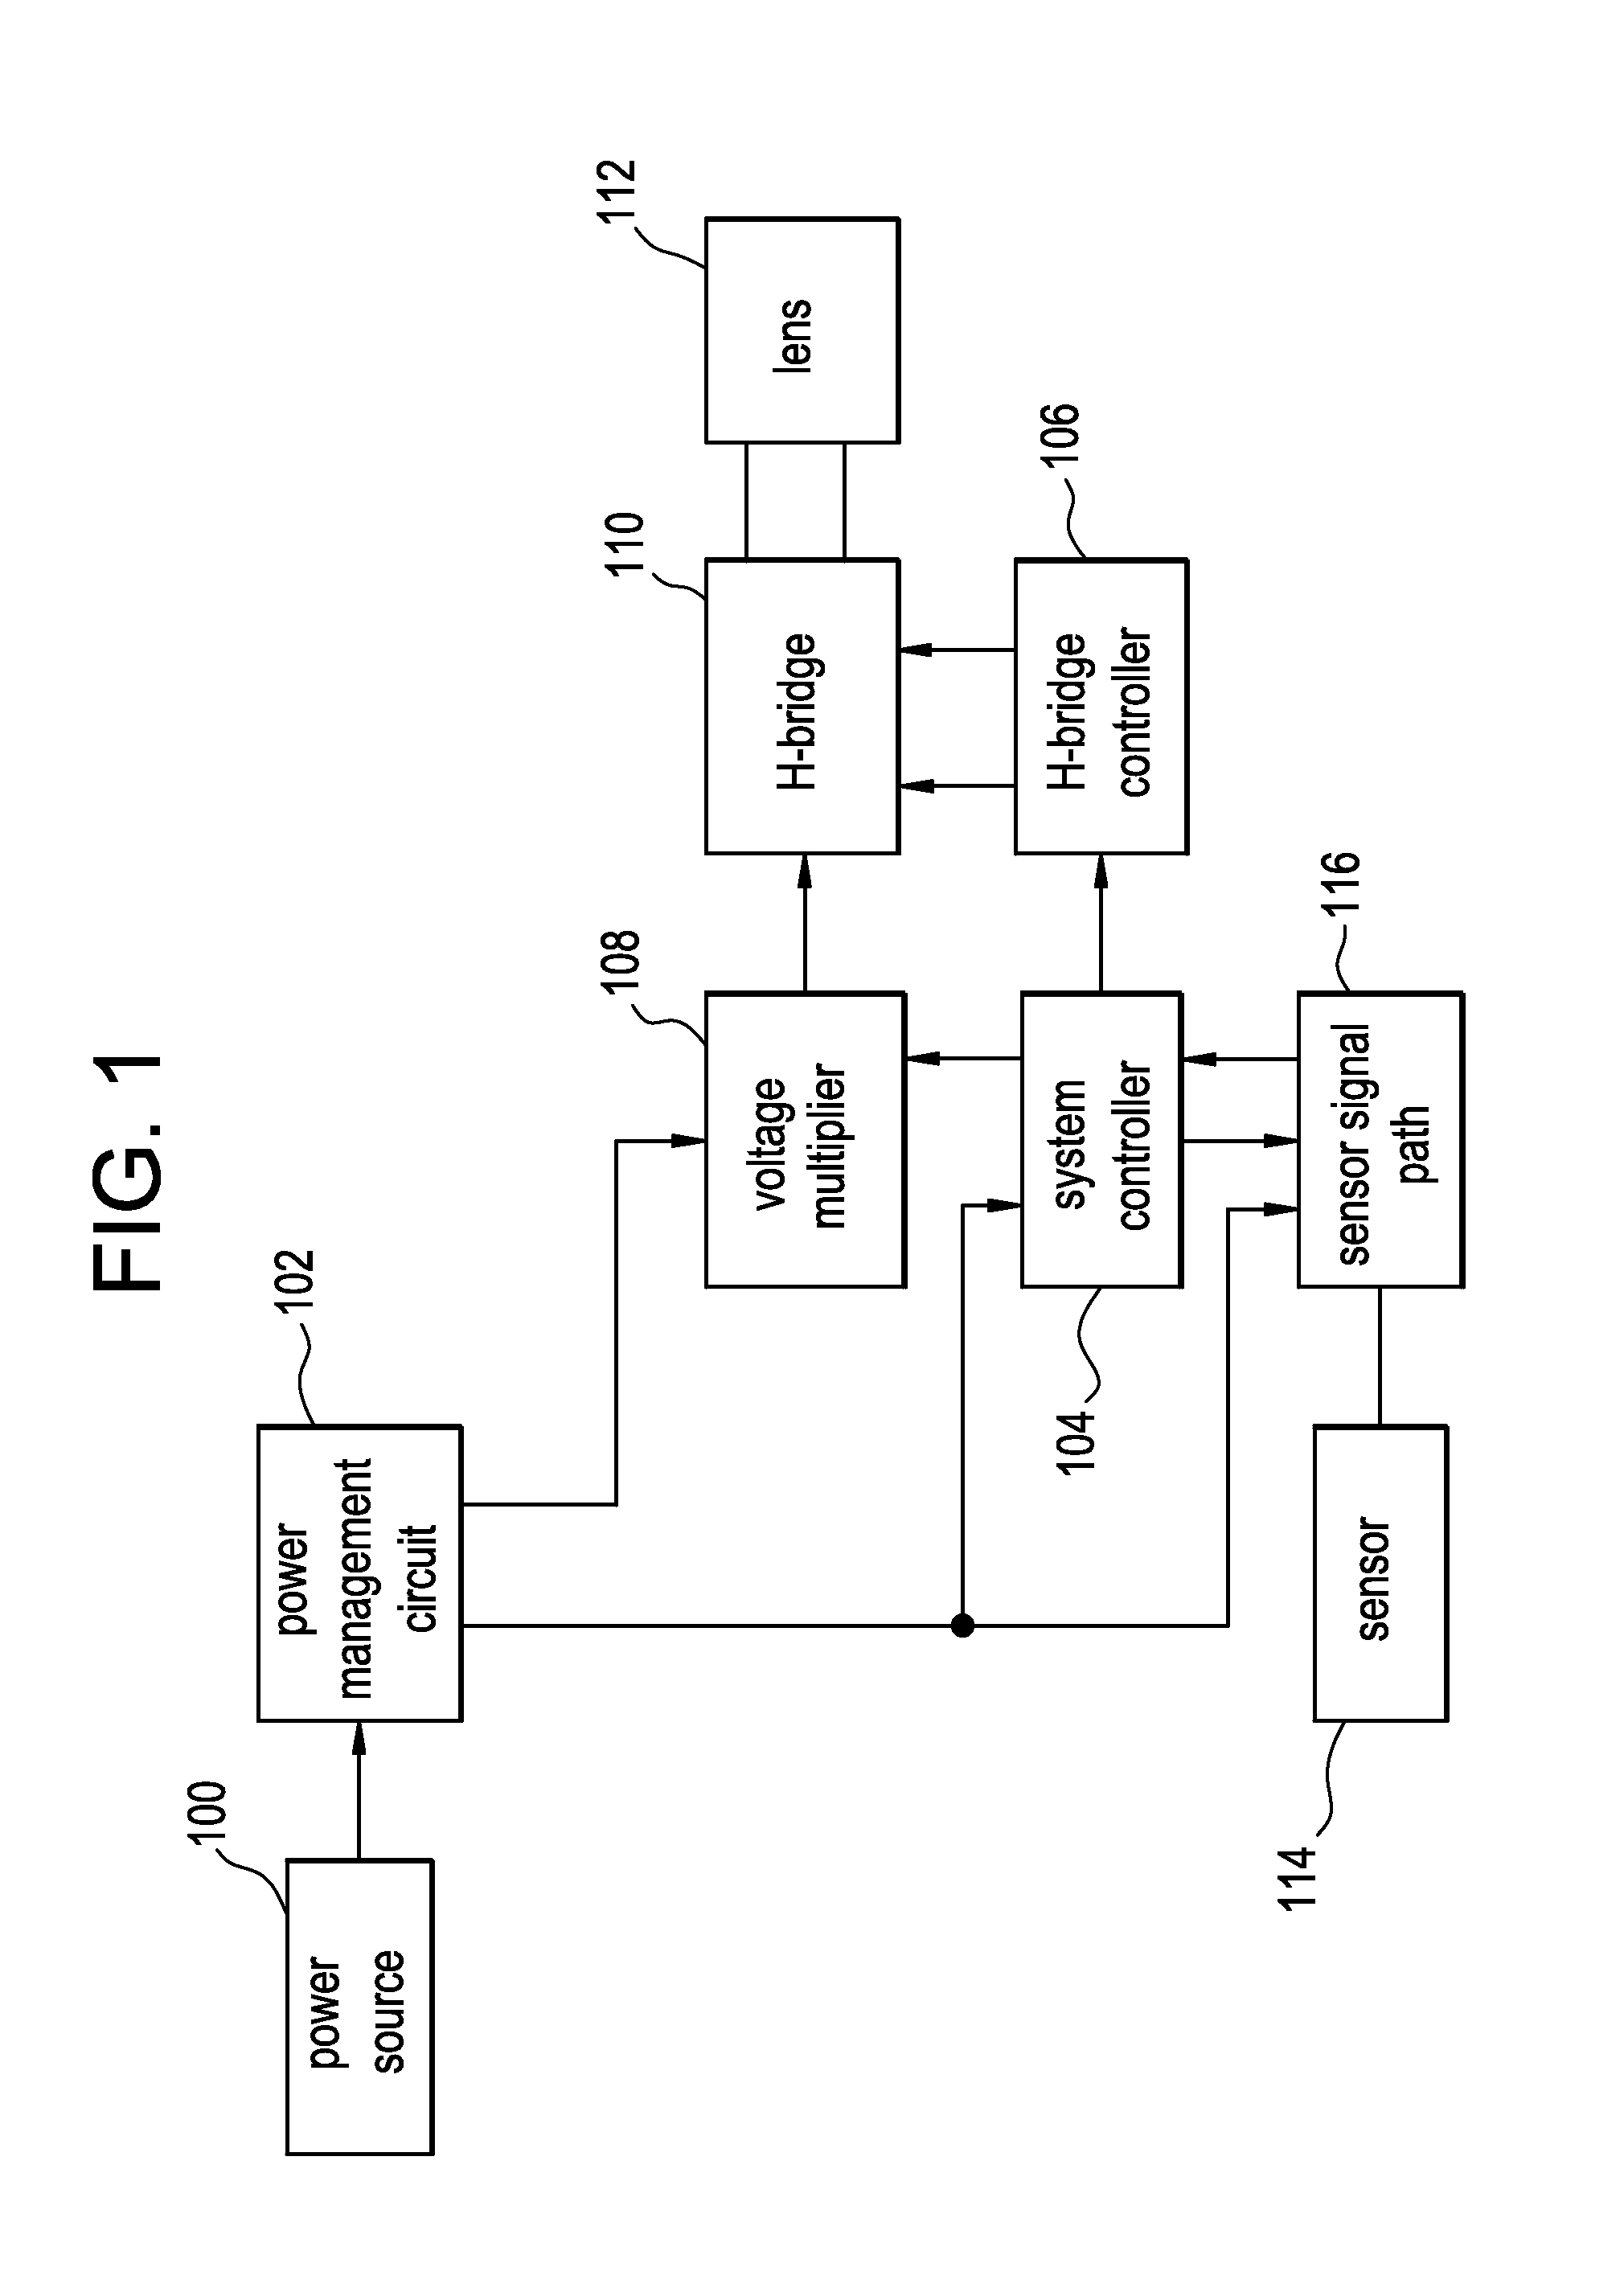 System controller for variable-optic electronic ophthalmic lens